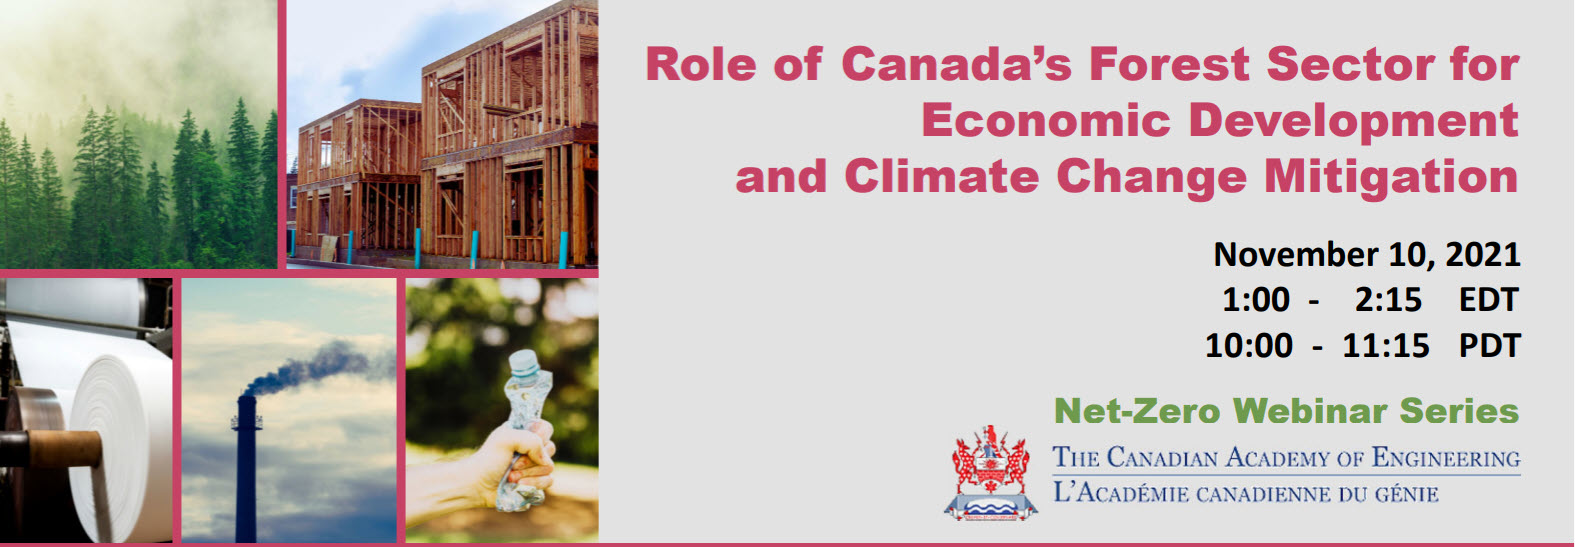 Event: Role of Canada